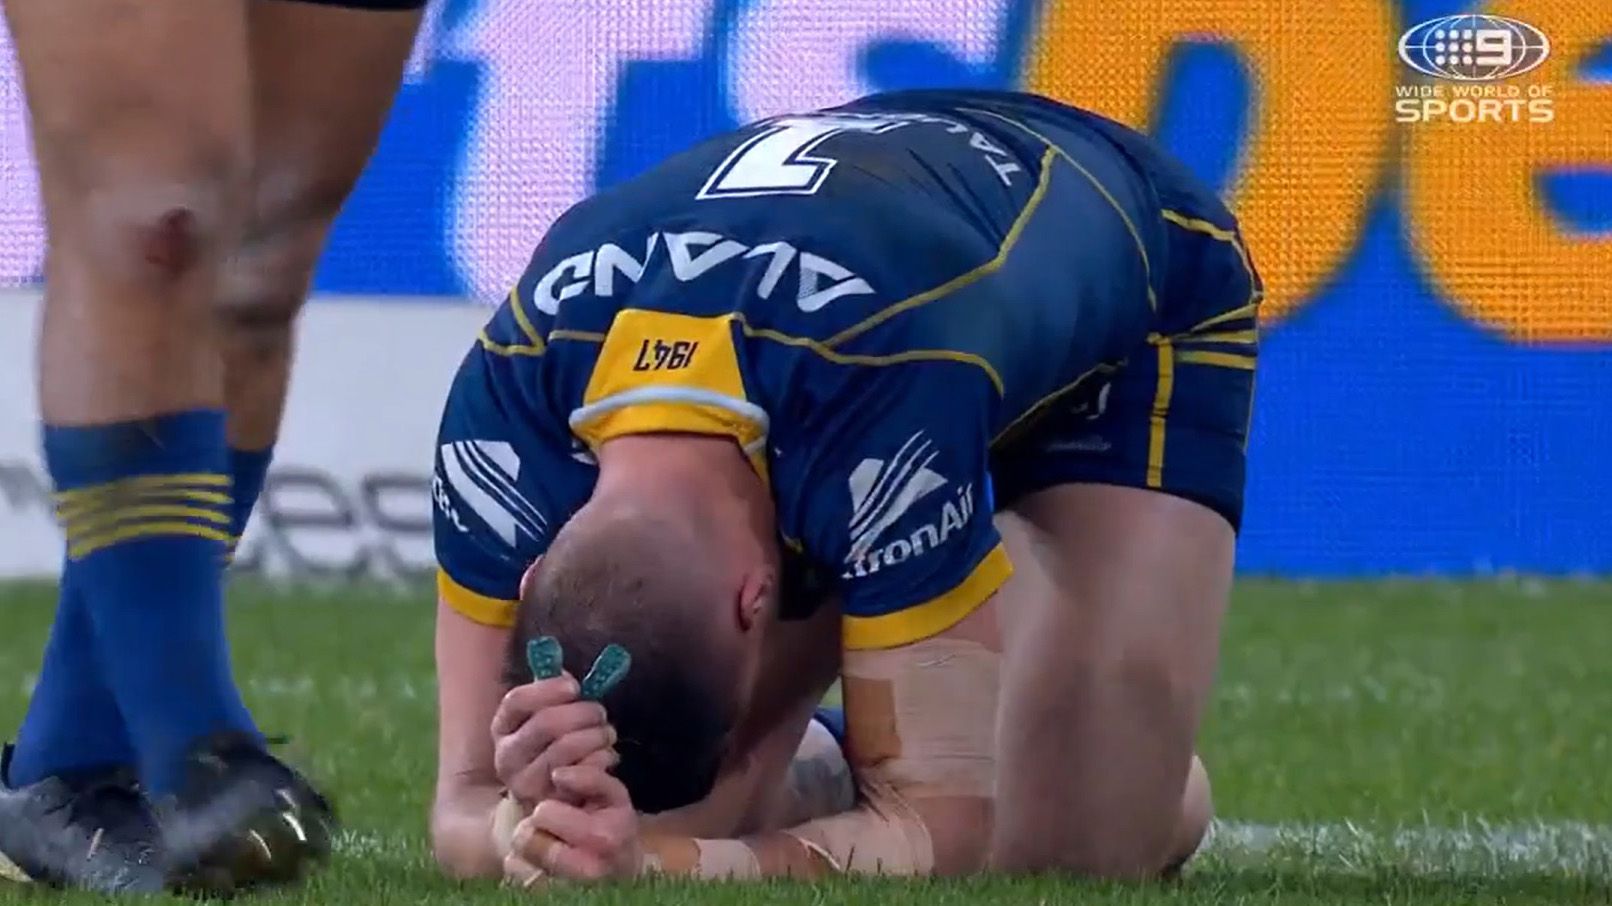 Clint Gutherson throws up after crunching hit from Marcelo Montoya